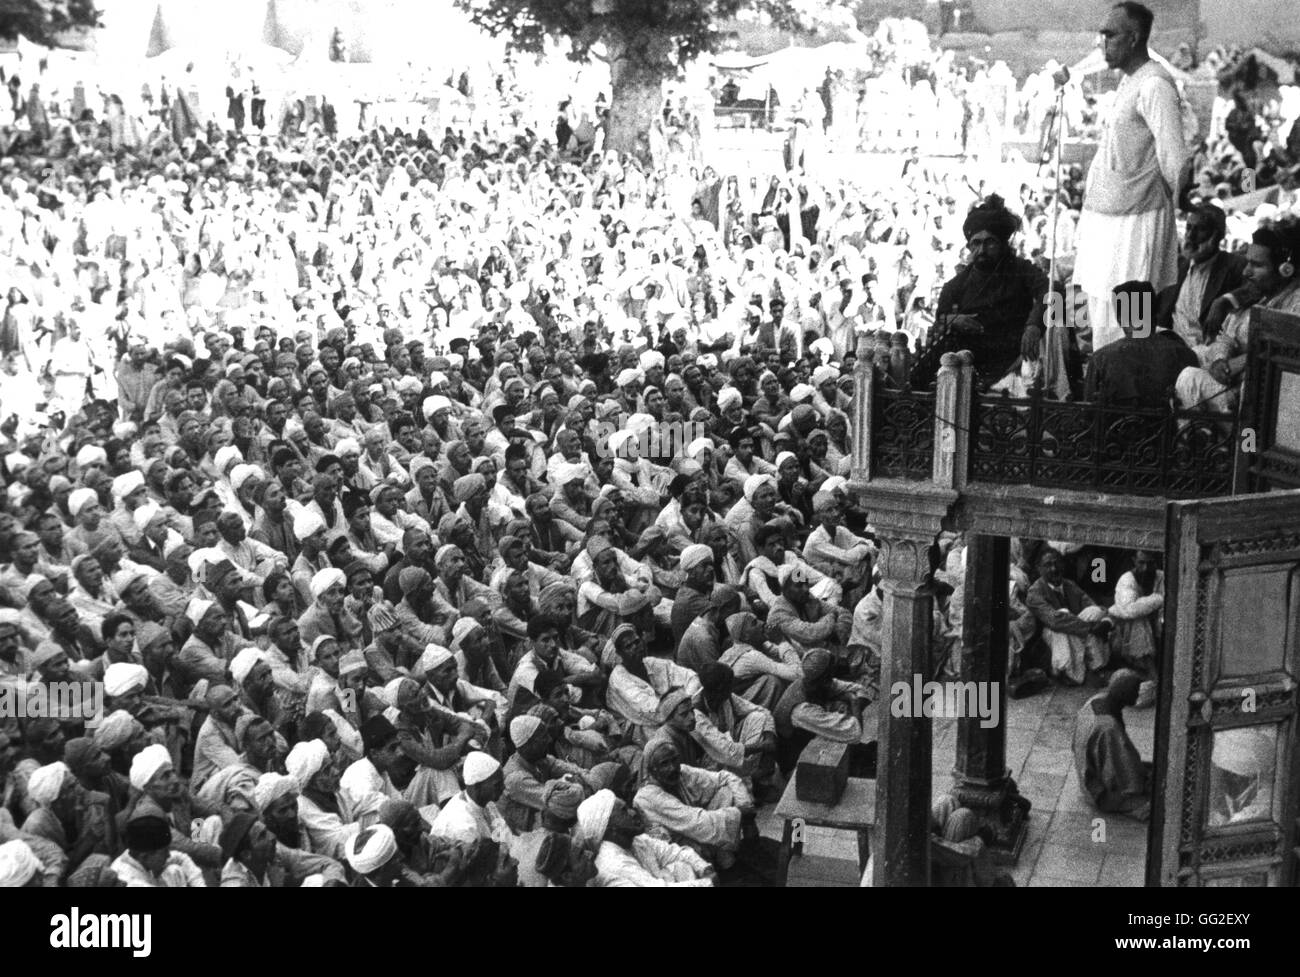 Kashmir - 1948 Surrounded by the crowd of his Muslim followers, Prime minister of Jammu and Kashmir Sheik Mohammed Abdullah is leading the prayers from a balcony of the Srinager mosque (capital of the pro-Indian part of Kashmir). U.N. Stock Photo